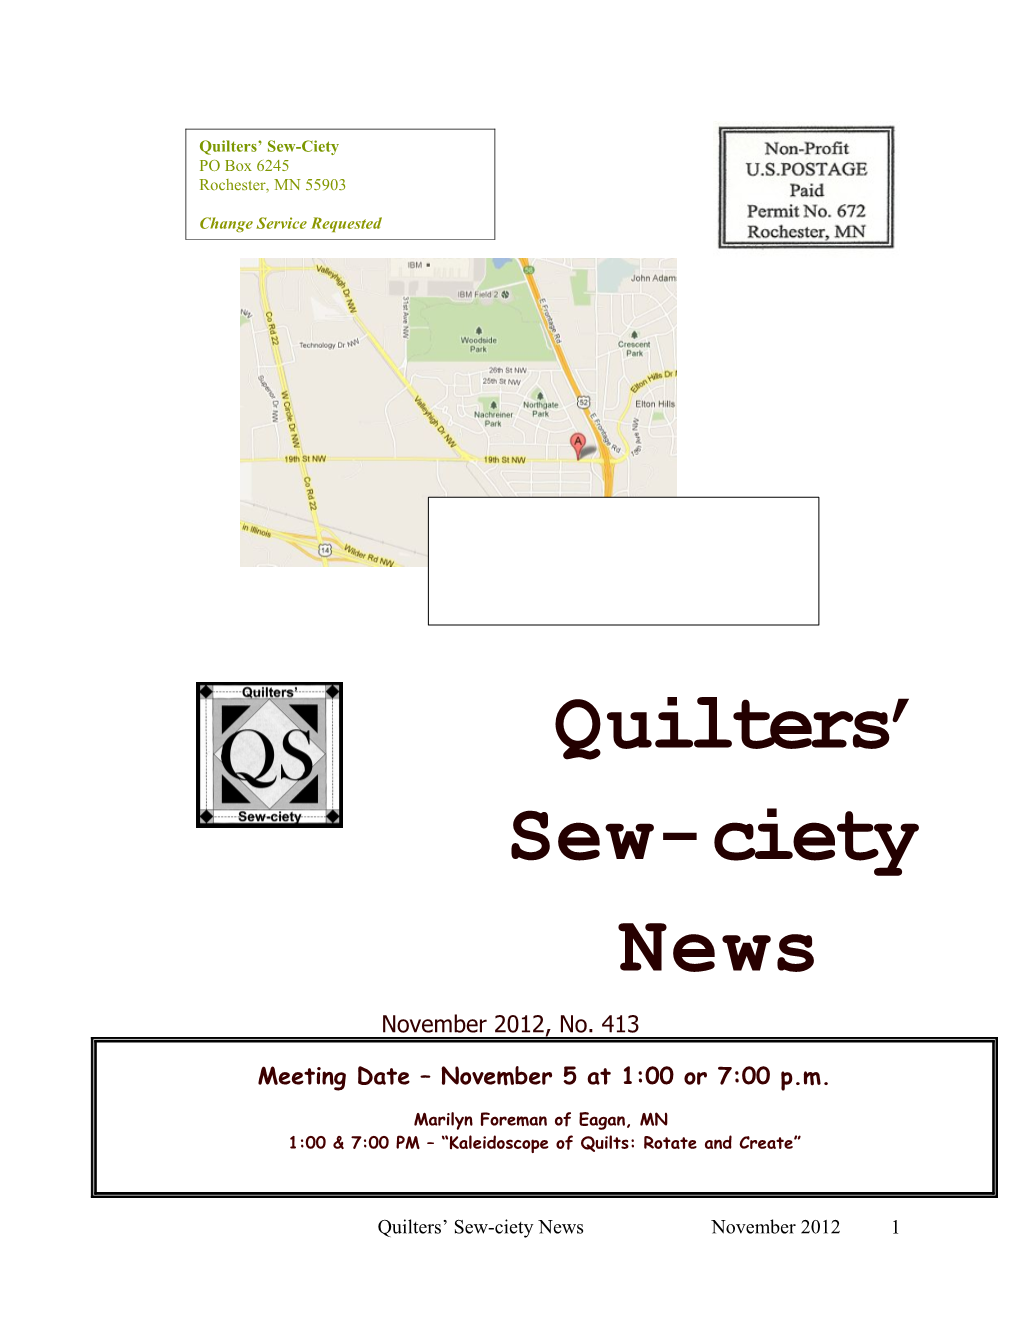 Quilters Sew-Ciety Was Founded in 1977, and Provides a Means for Quilters To